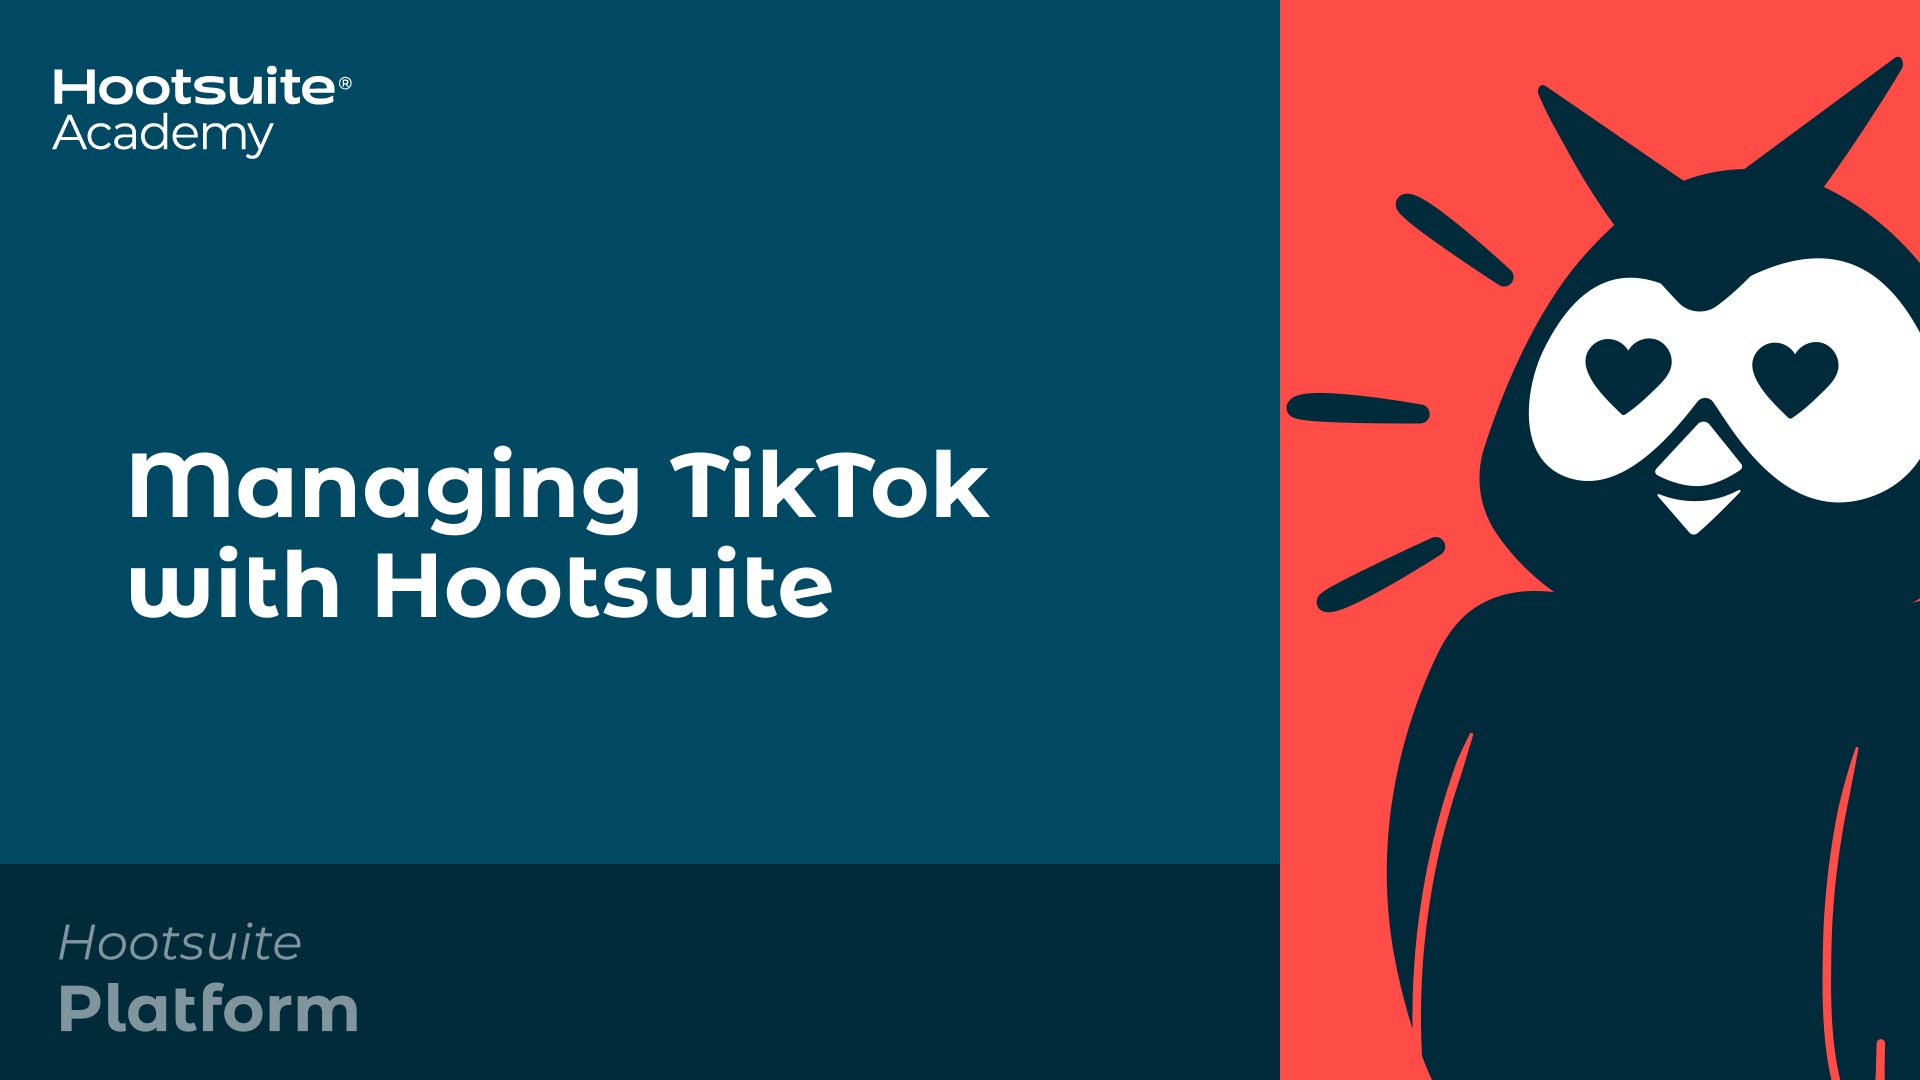 Video: Managing TikTok with Hootsuite.